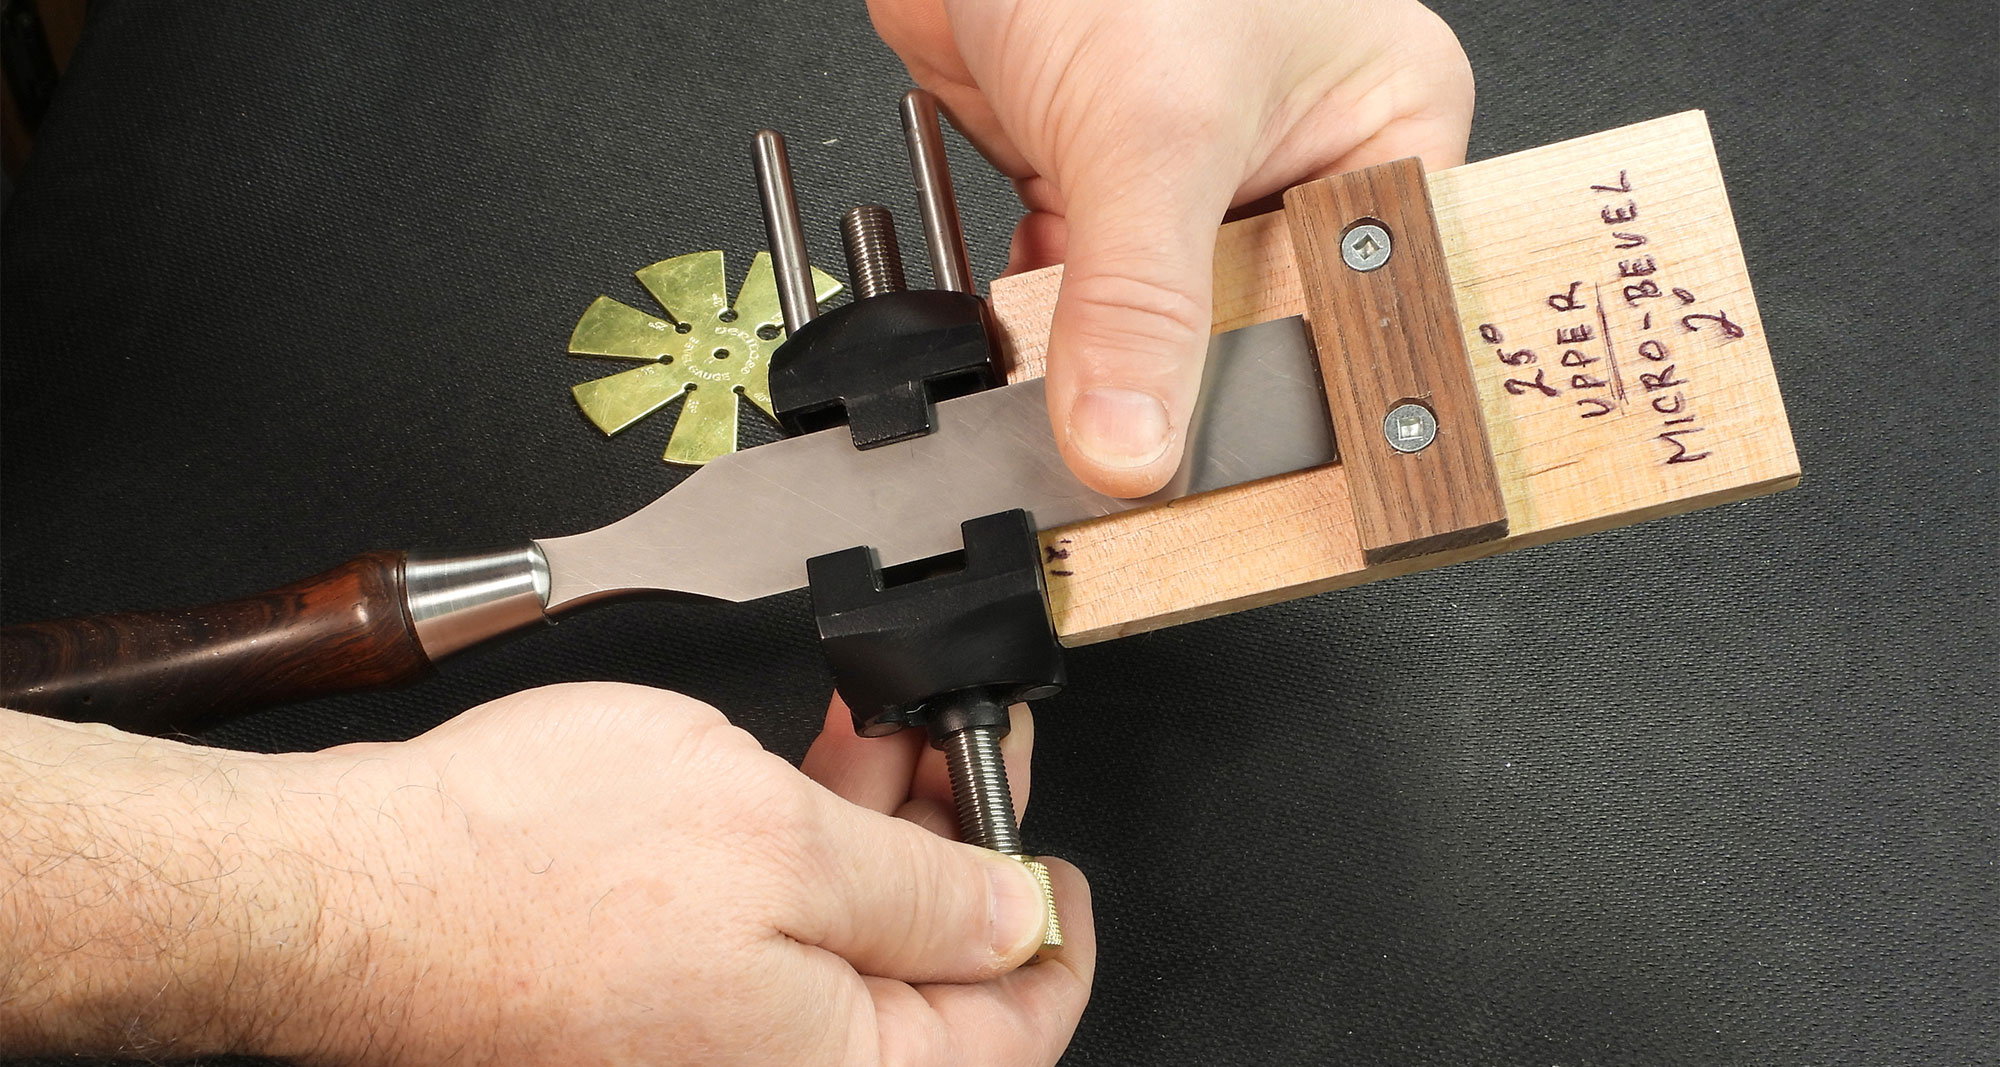 Handheld protrusion jig in use